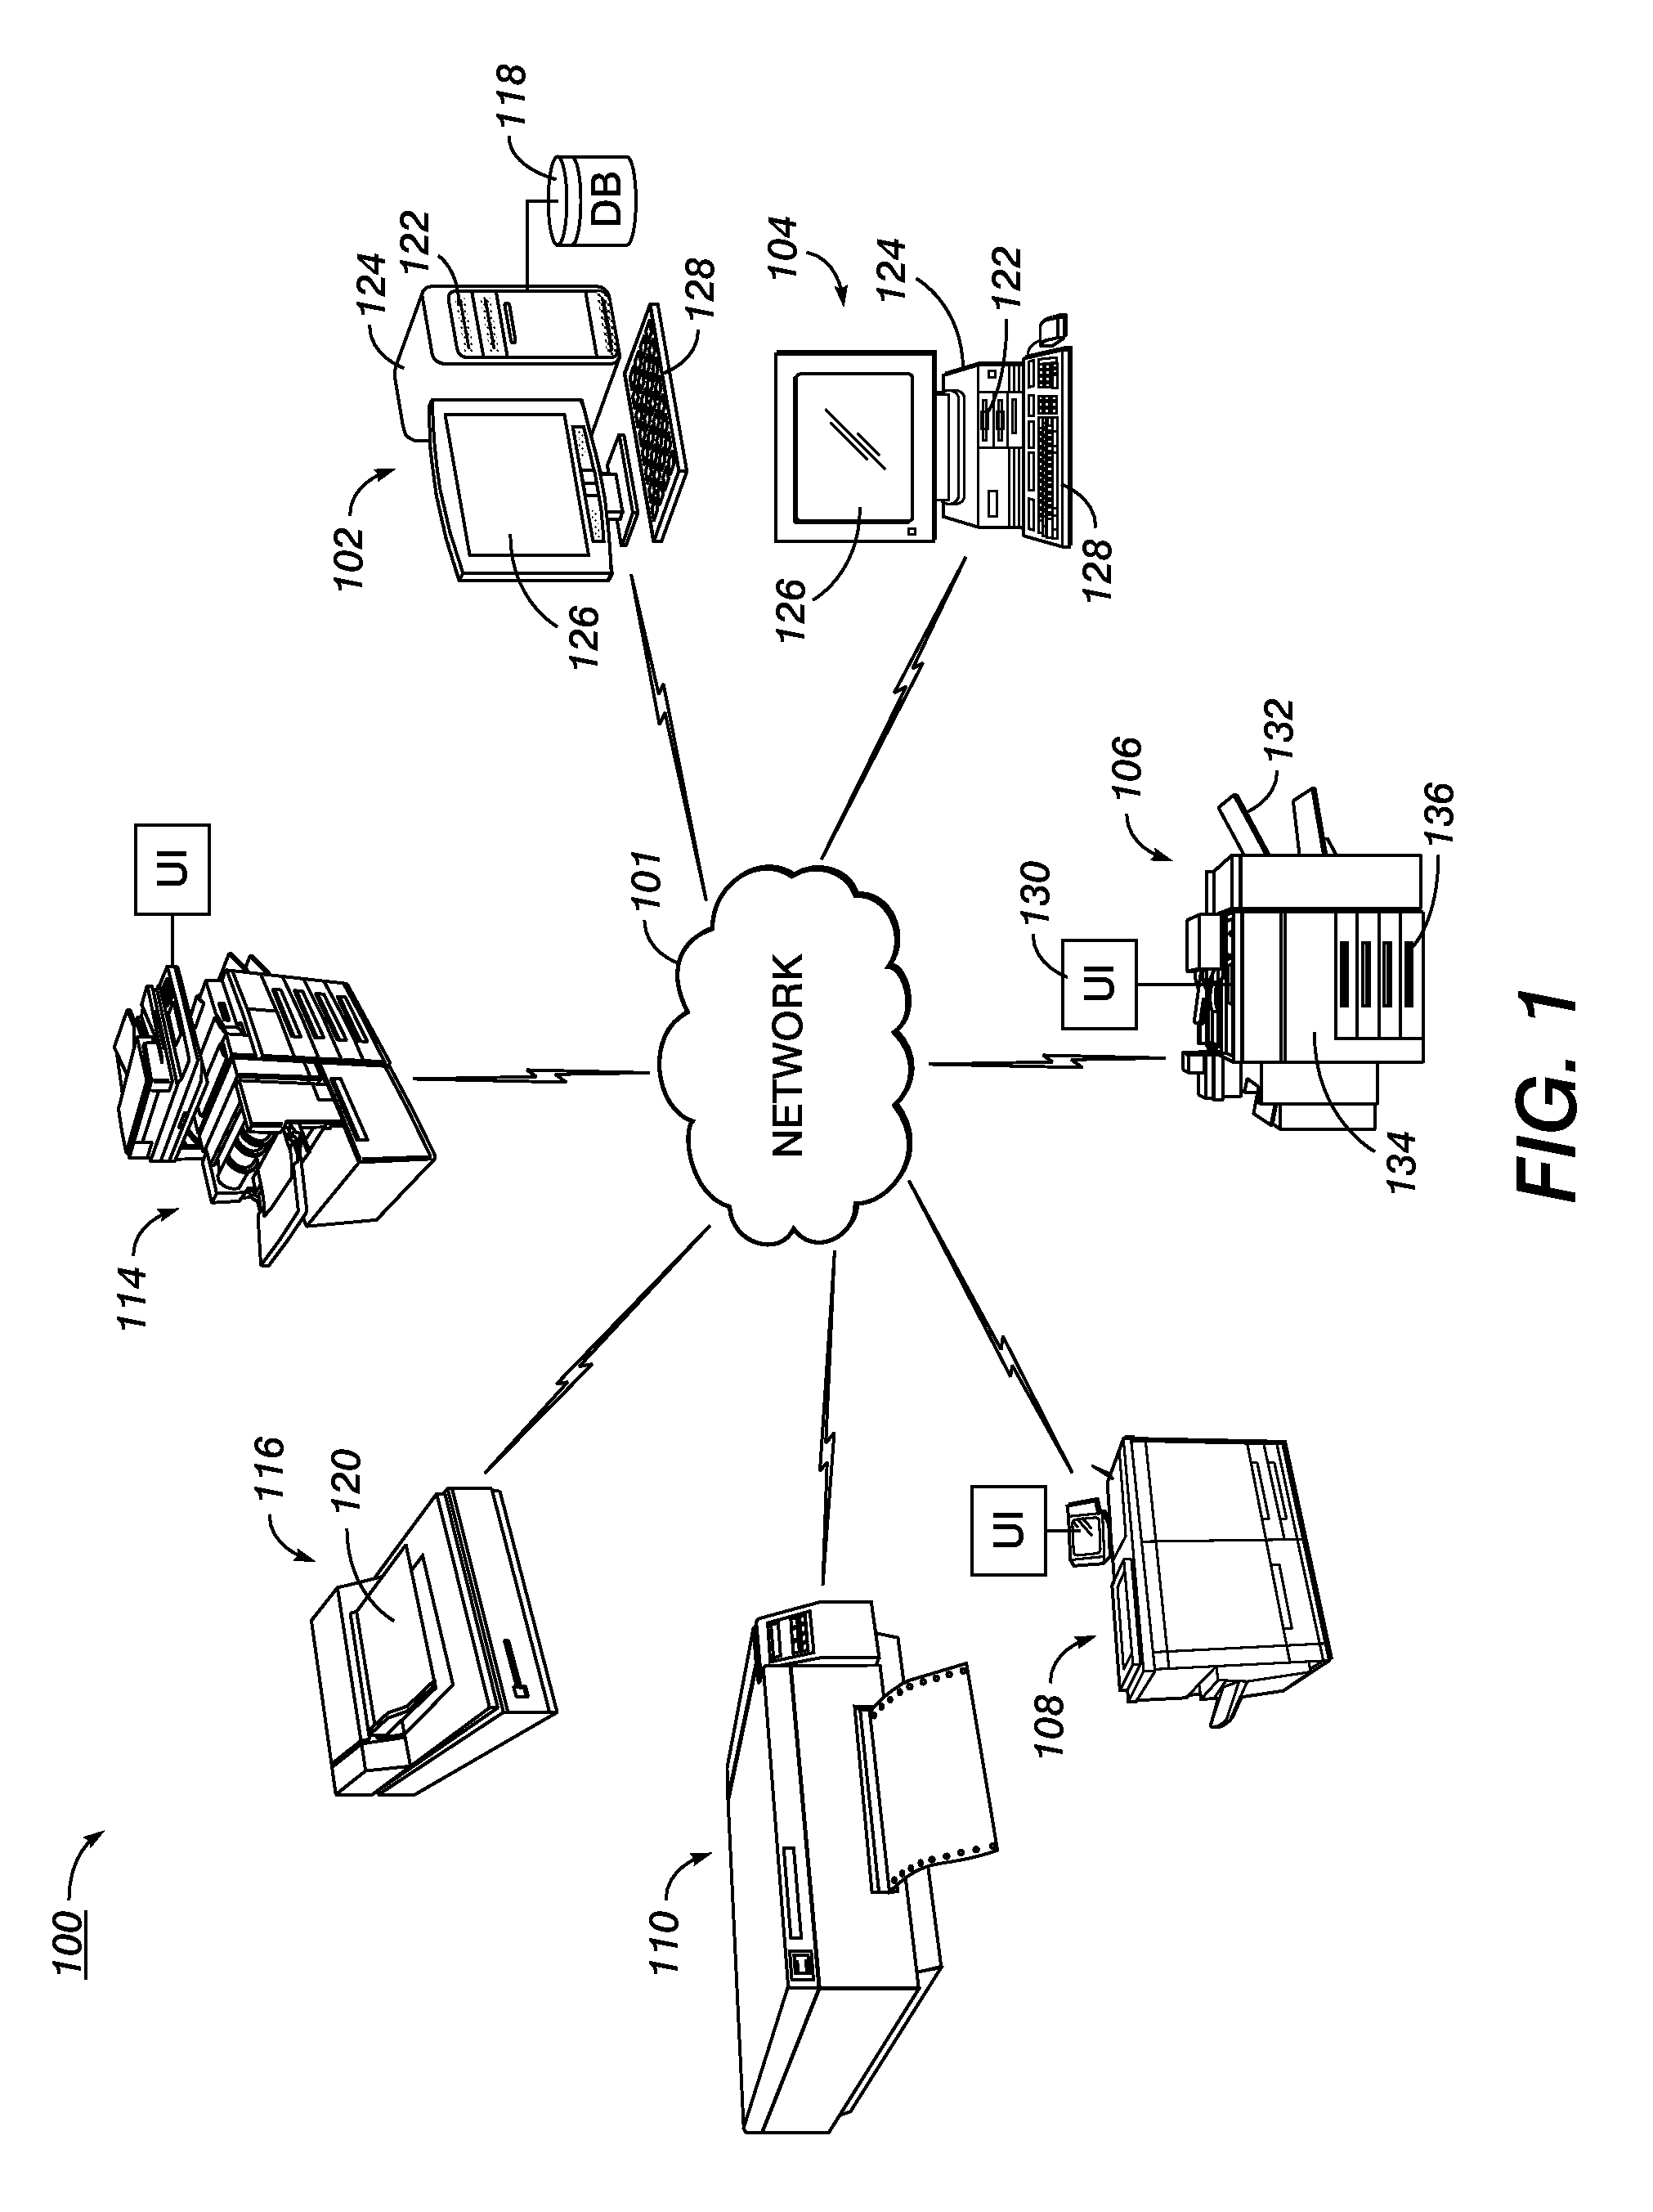 Print device selection in a networked print job environment